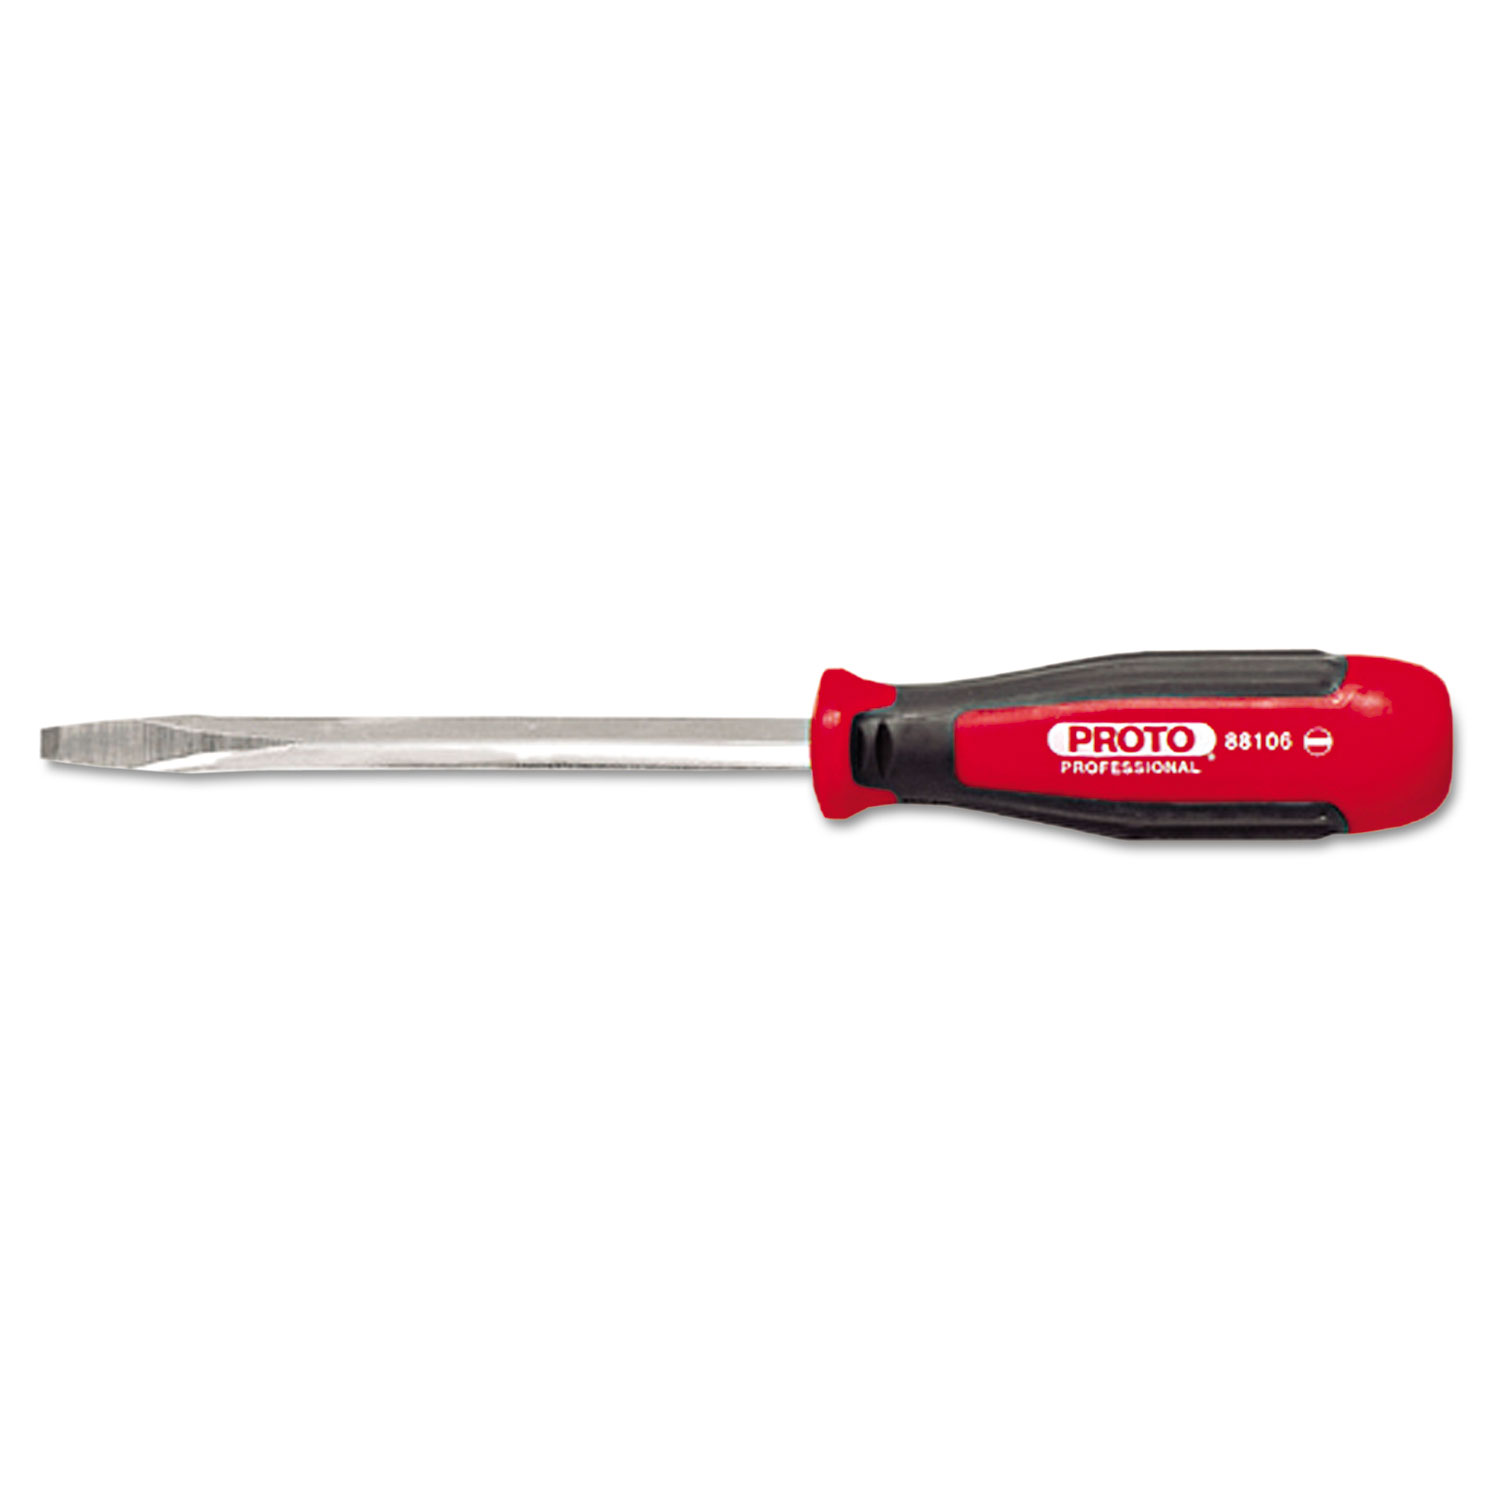 5/16in Slotted Square Shank Screwdriver, 10 7/8in Long